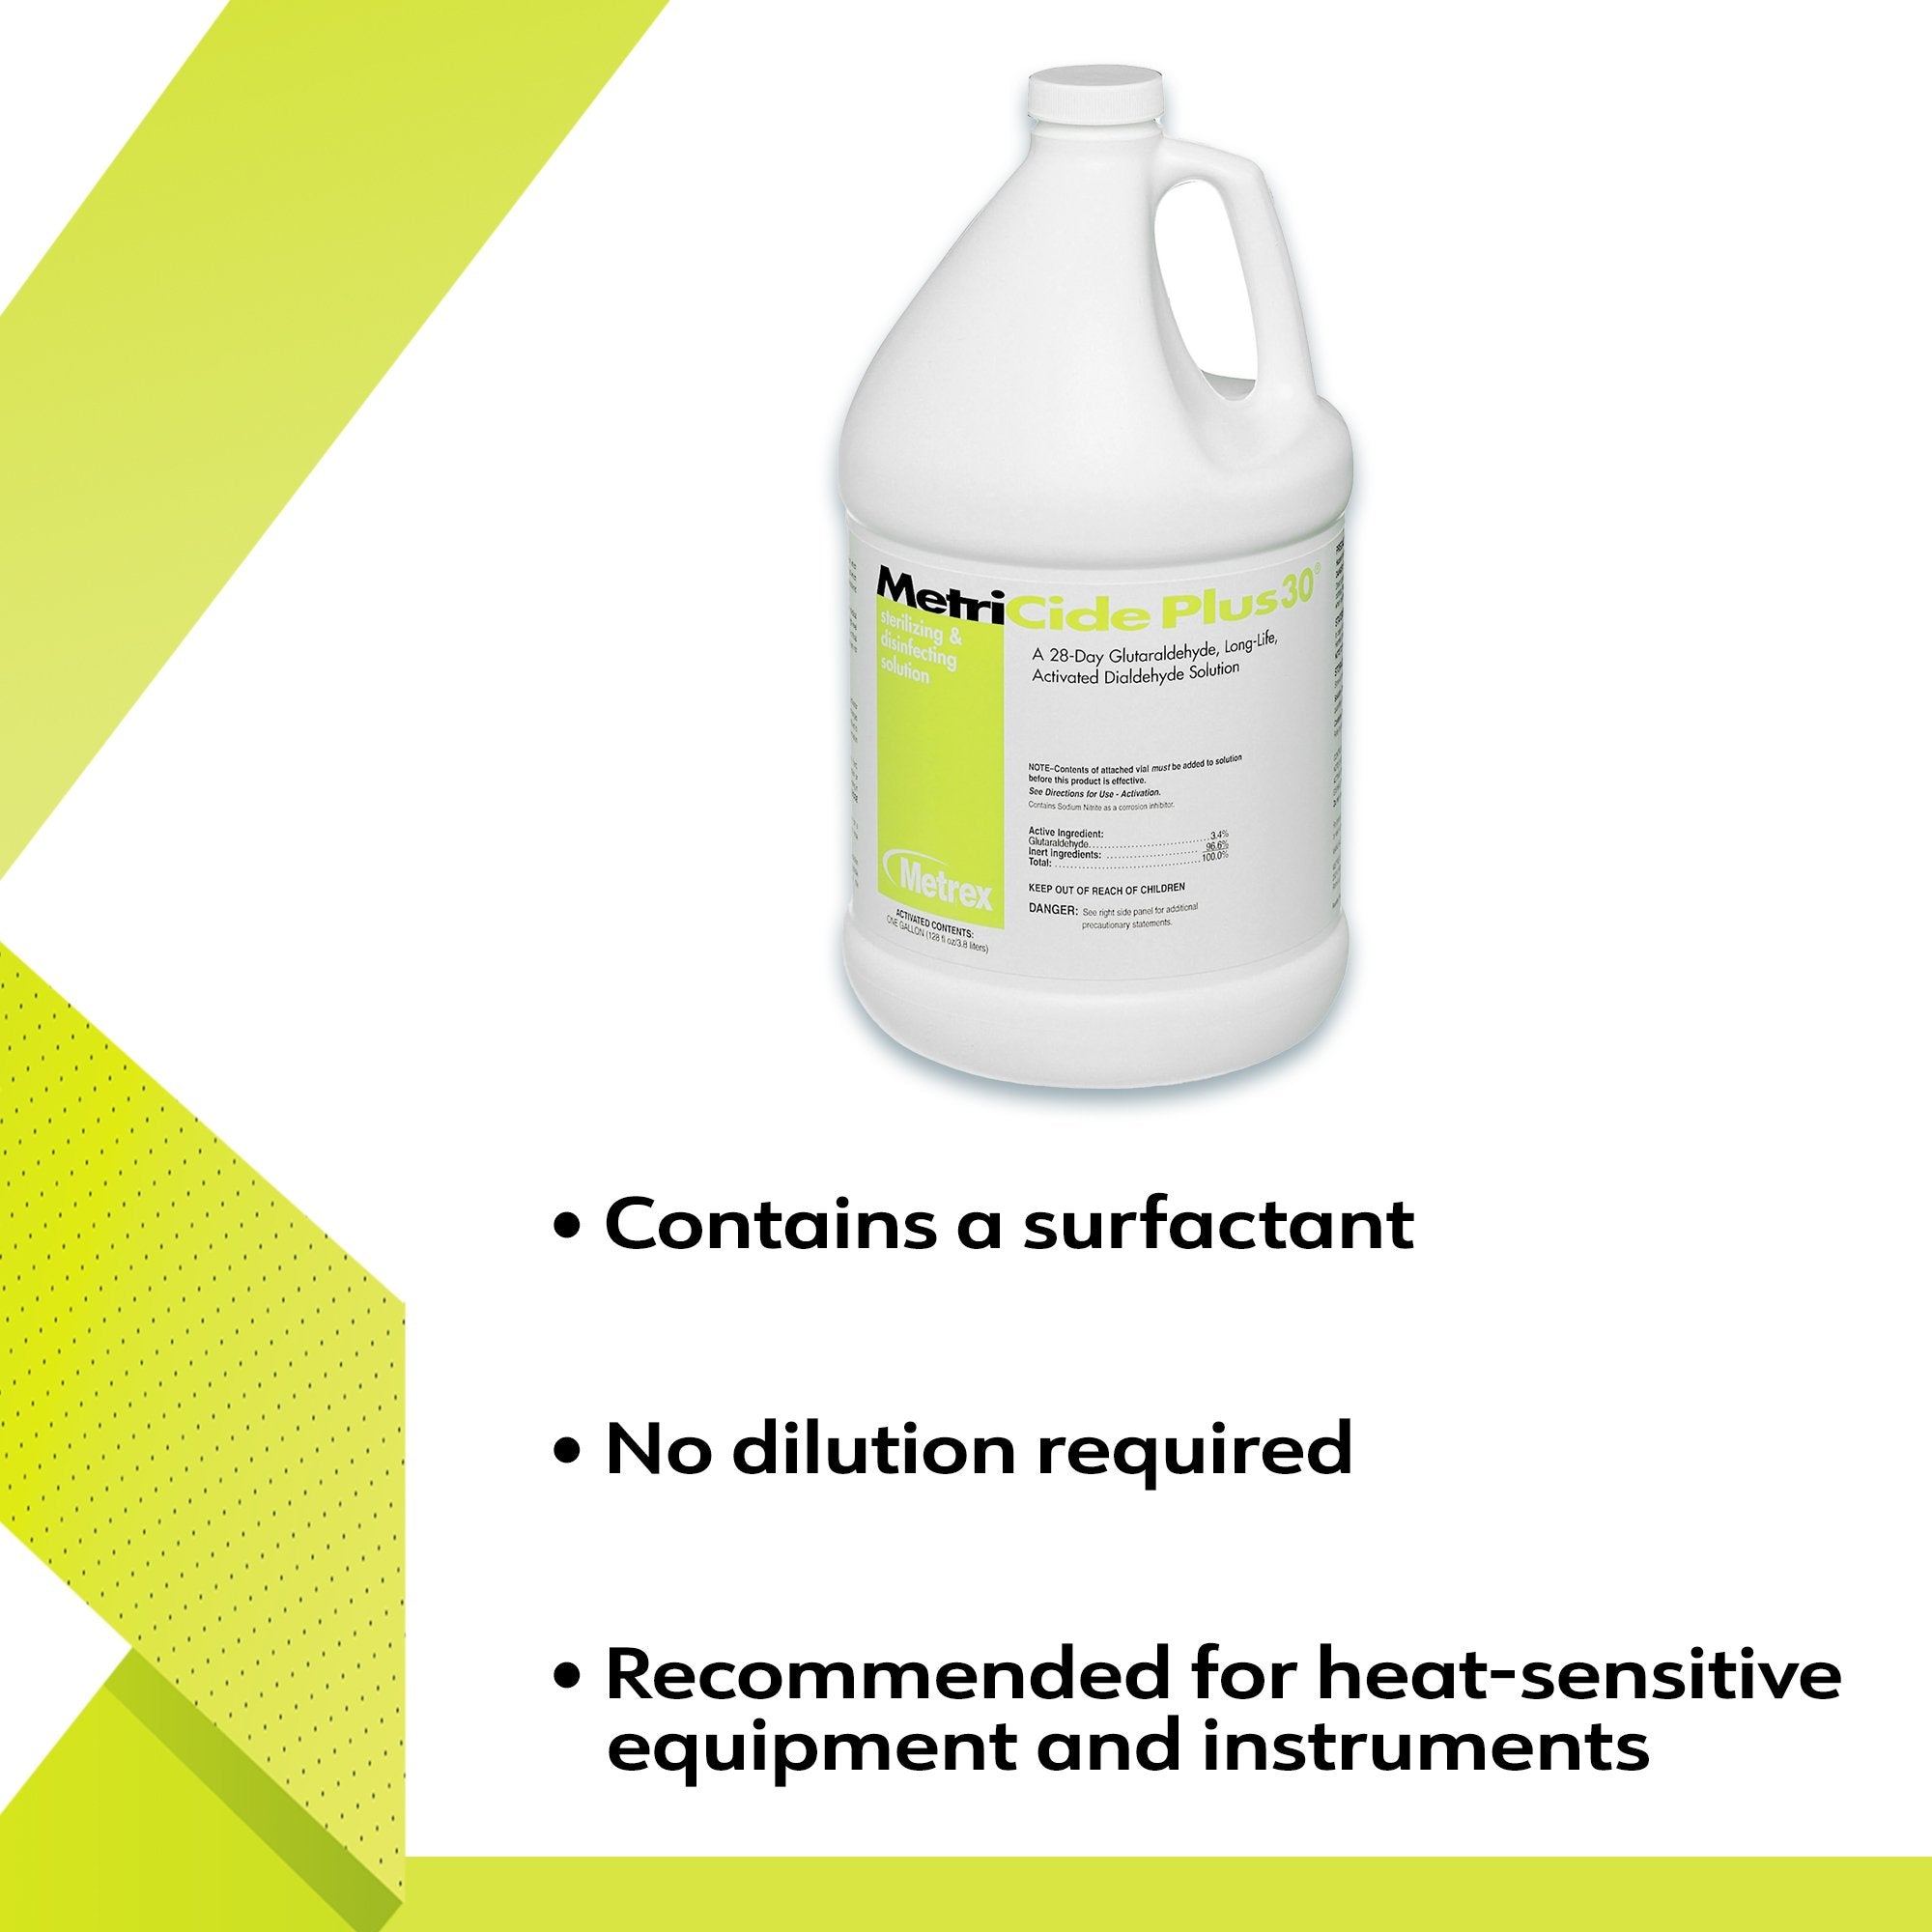 Glutaraldehyde High-Level Disinfectant MetriCide Plus 30 Activation Required Liquid 1 gal. Jug Max 28 Day Reuse